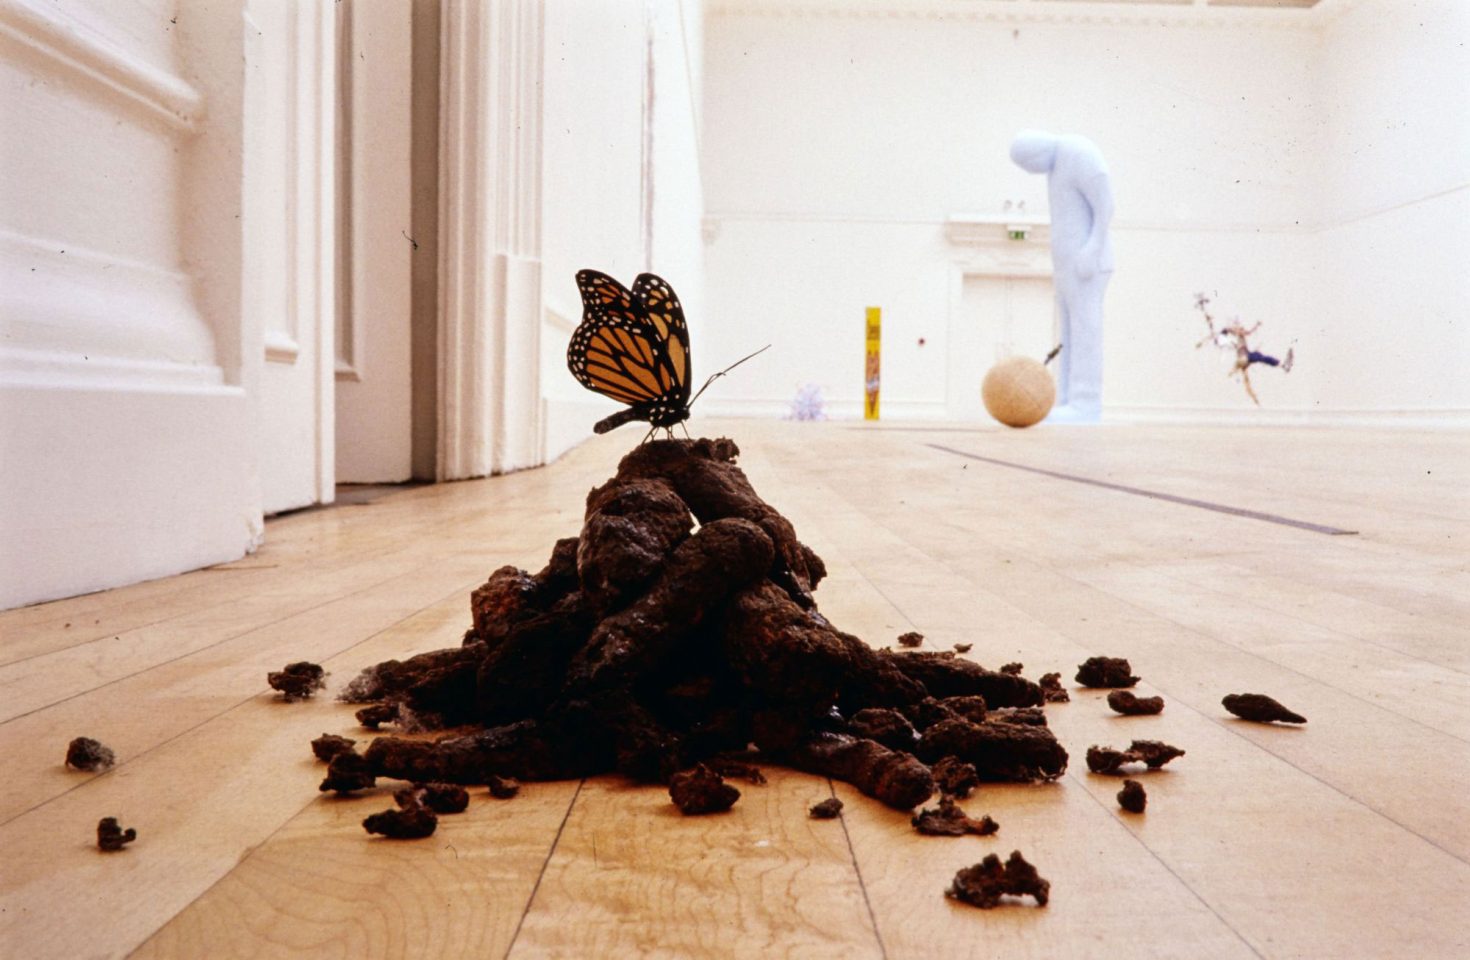 Installation view of Tom Friedman&#8217;s 2004 solo exhibition.
